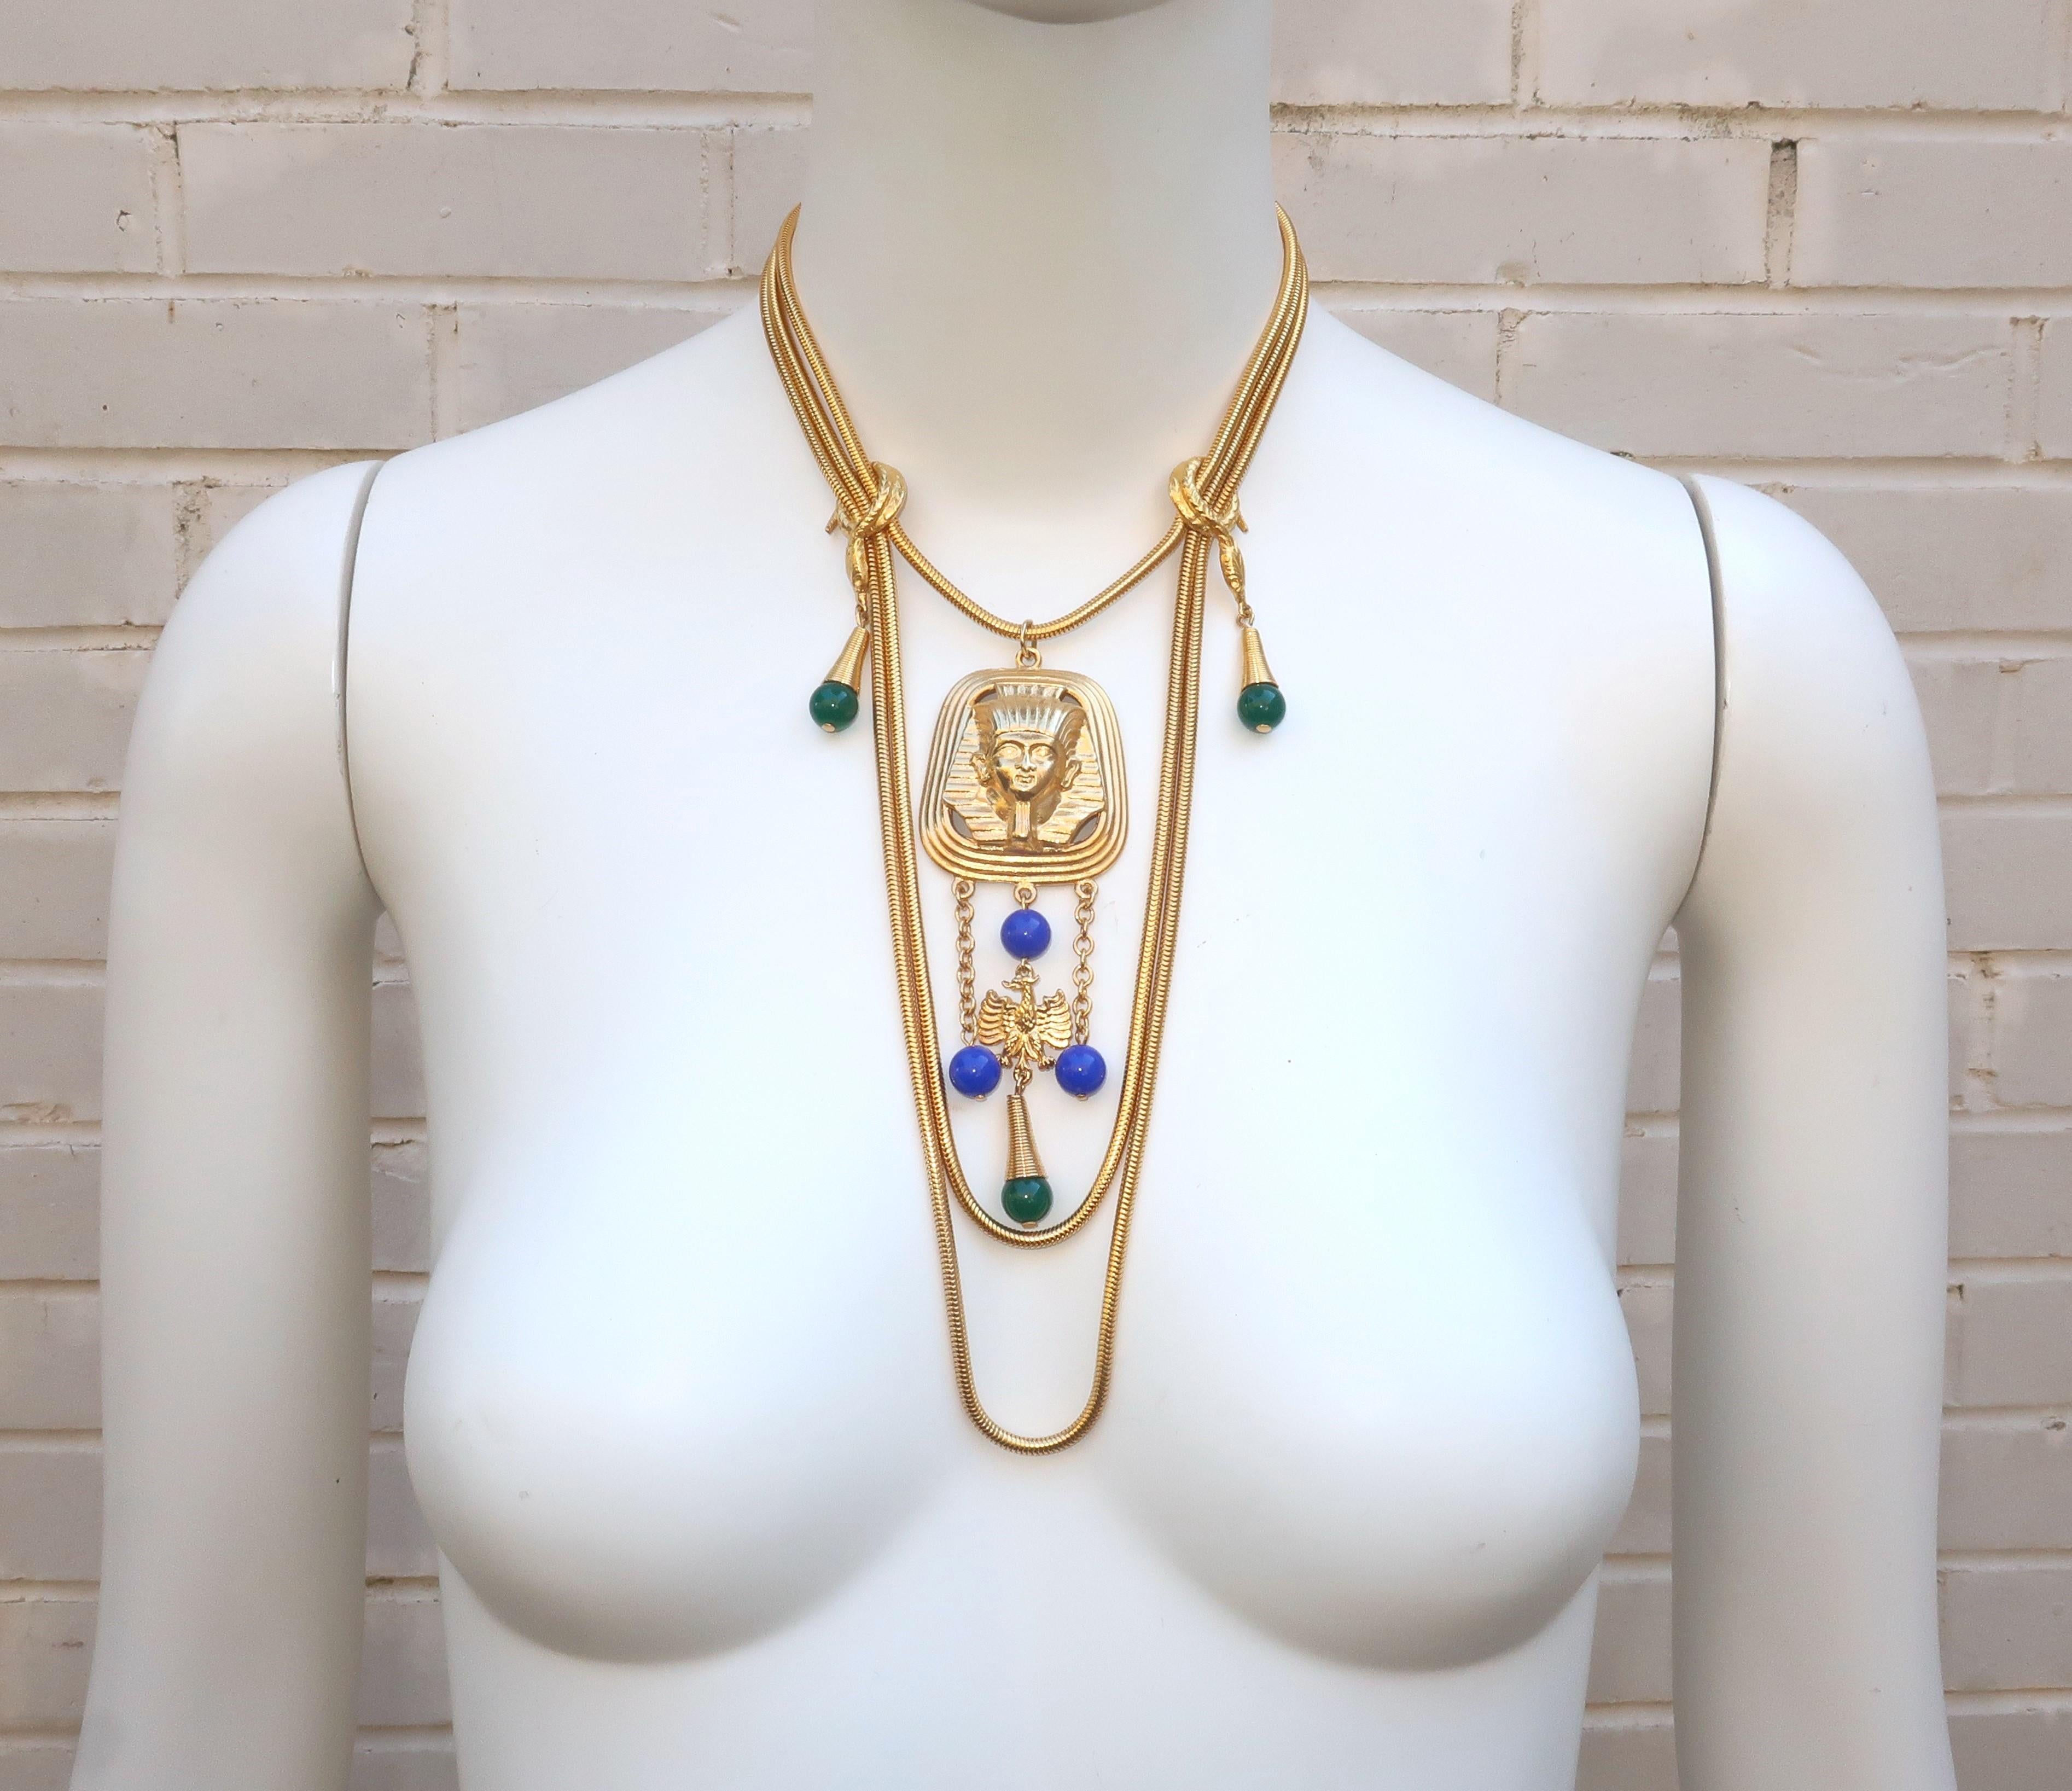 1970's Egyptian style multi strand necklace in a gold plated metal with blue and green resin beads.  The three strand necklace is designed with graduated lengths of serpentine chain accented by snake stays and a Pharaoh pendant.  Outfitted with a